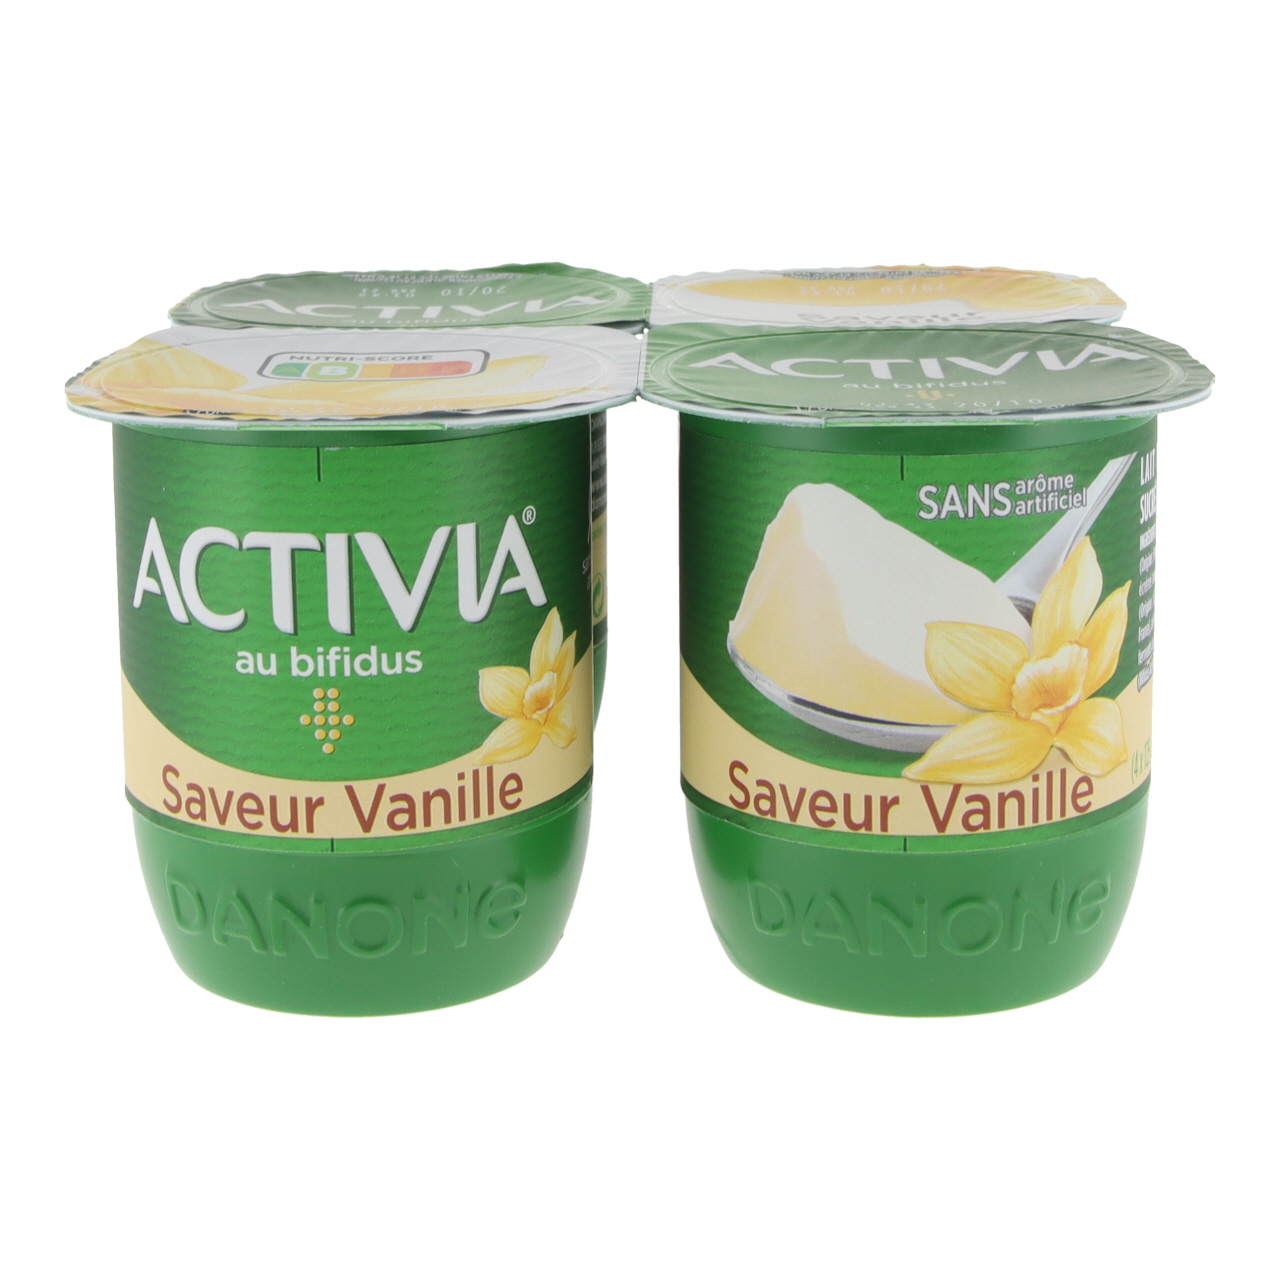 4 Yaourts arôme naturel vanille (LYCEE AGRICOLE)